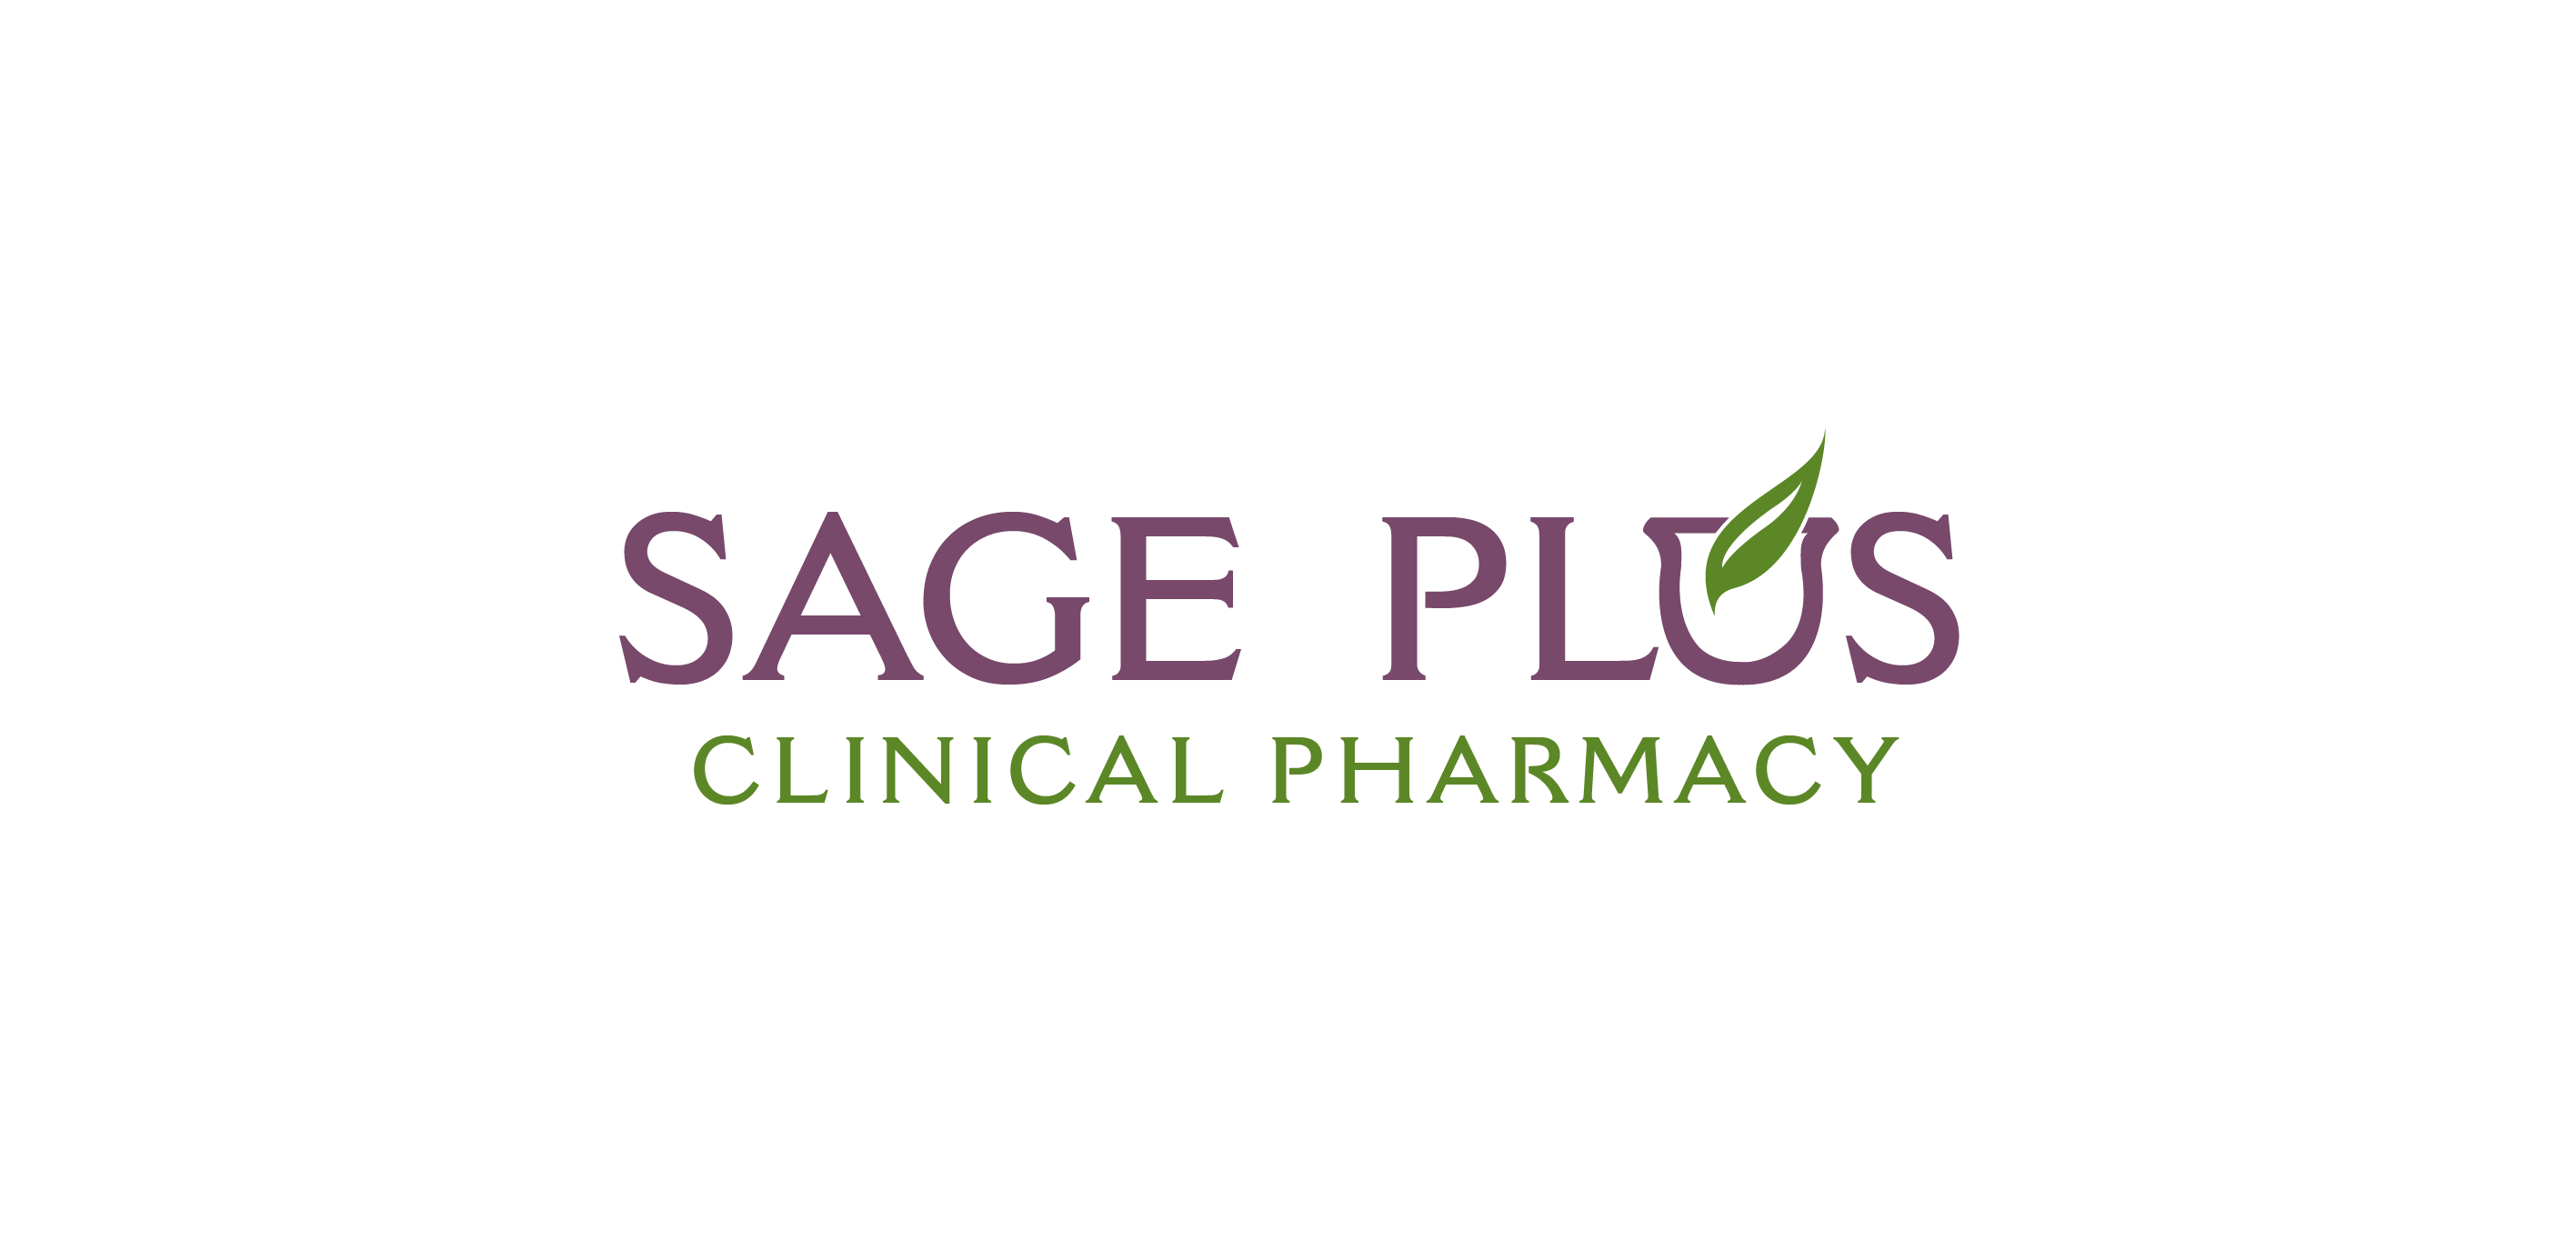 Non-traditional Drug Store - Sage Plus Clinical Pharmacy